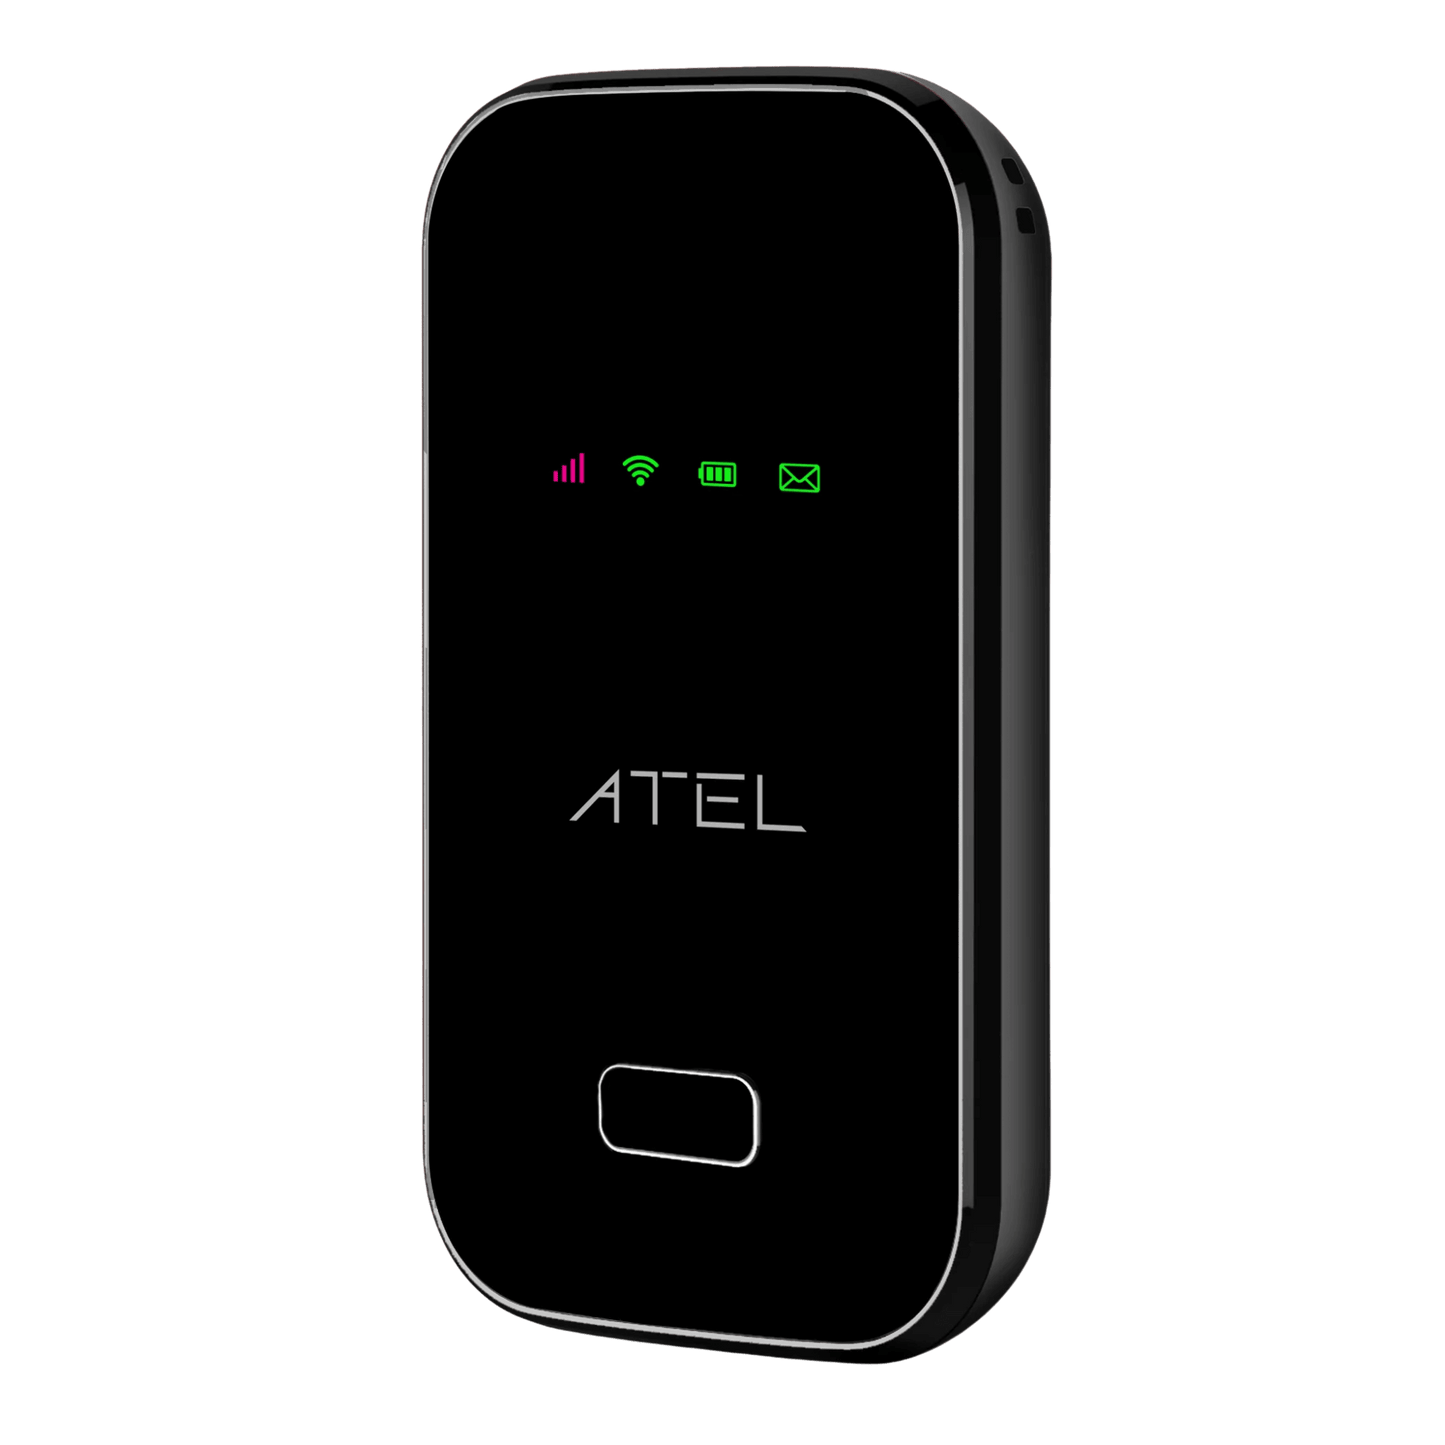 ATEL ARCH W01 4G LTE Mobile Hotspot Compatible w/ T-Mobile, Red Pocket, Gen Mobile, AT&T, Google Fi